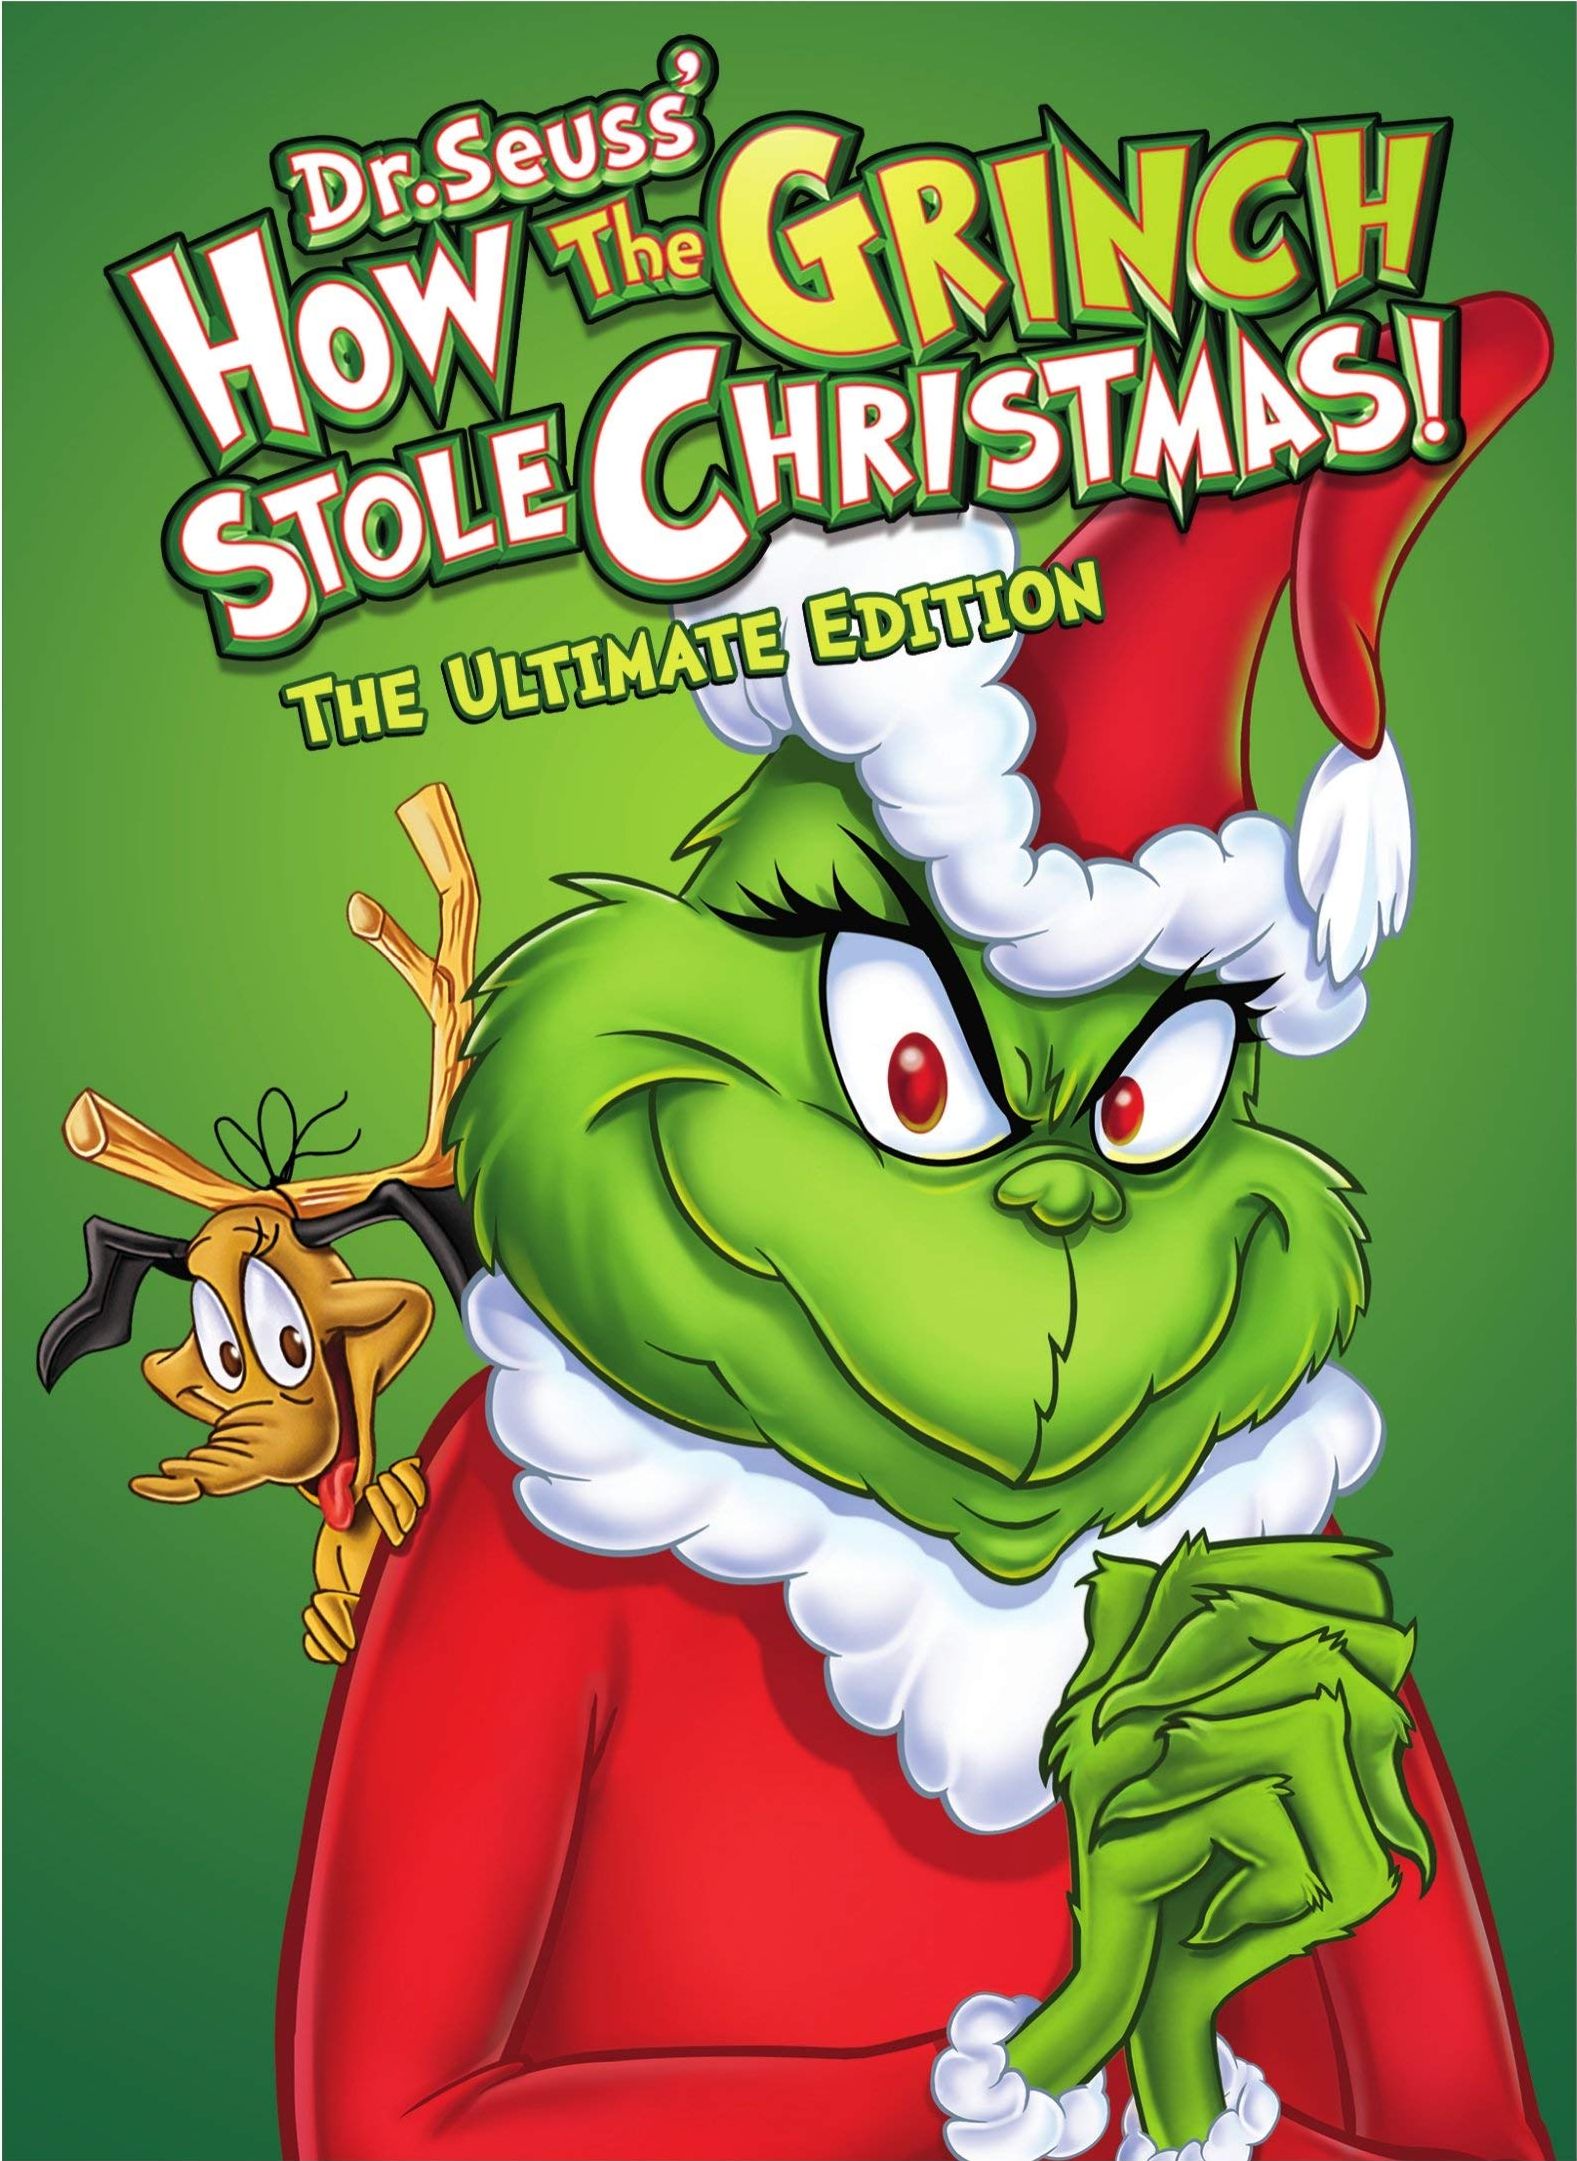 How The Grinch Stole Christmas DVD Release Date